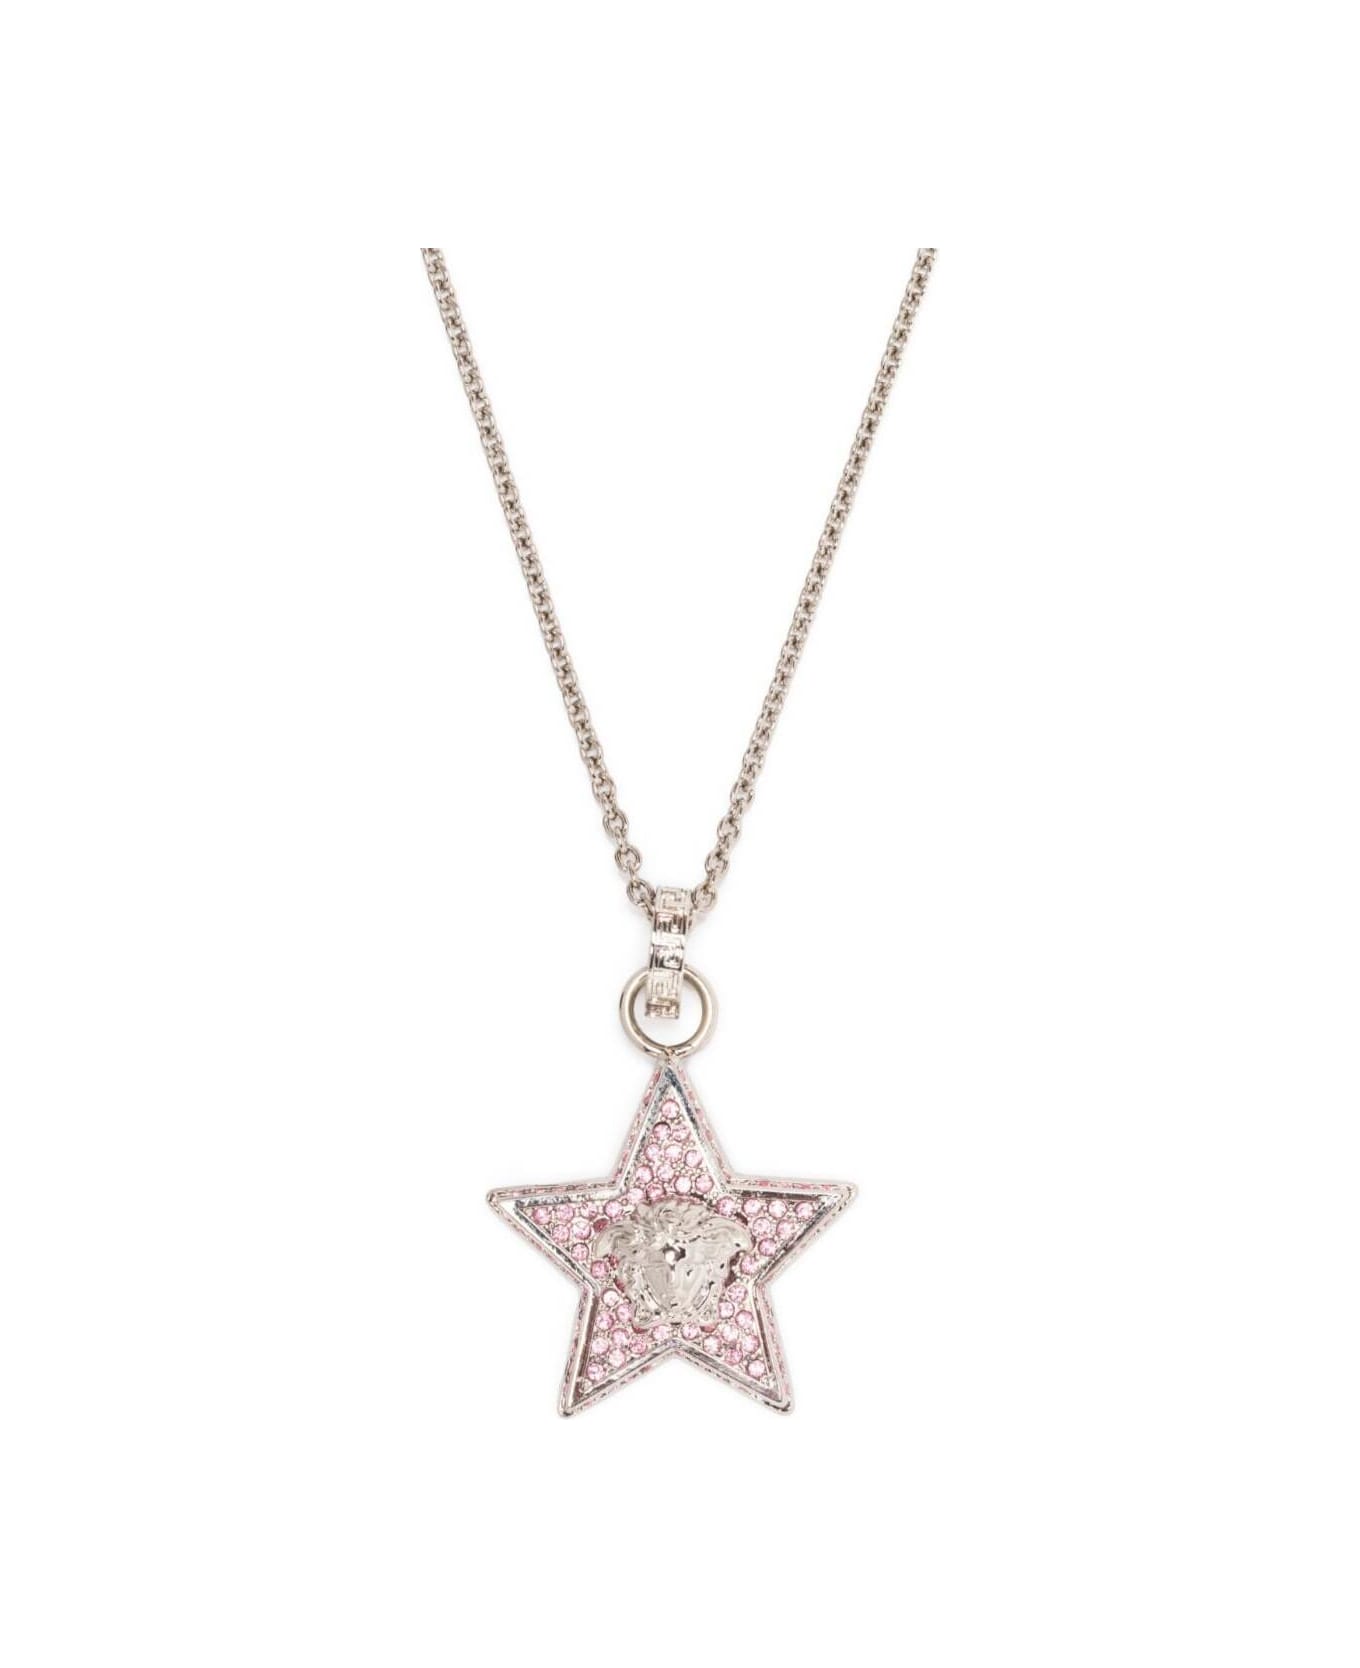 Versace Silver Tone Star Pendant Chain Necklace In Brass Woman - Metallic